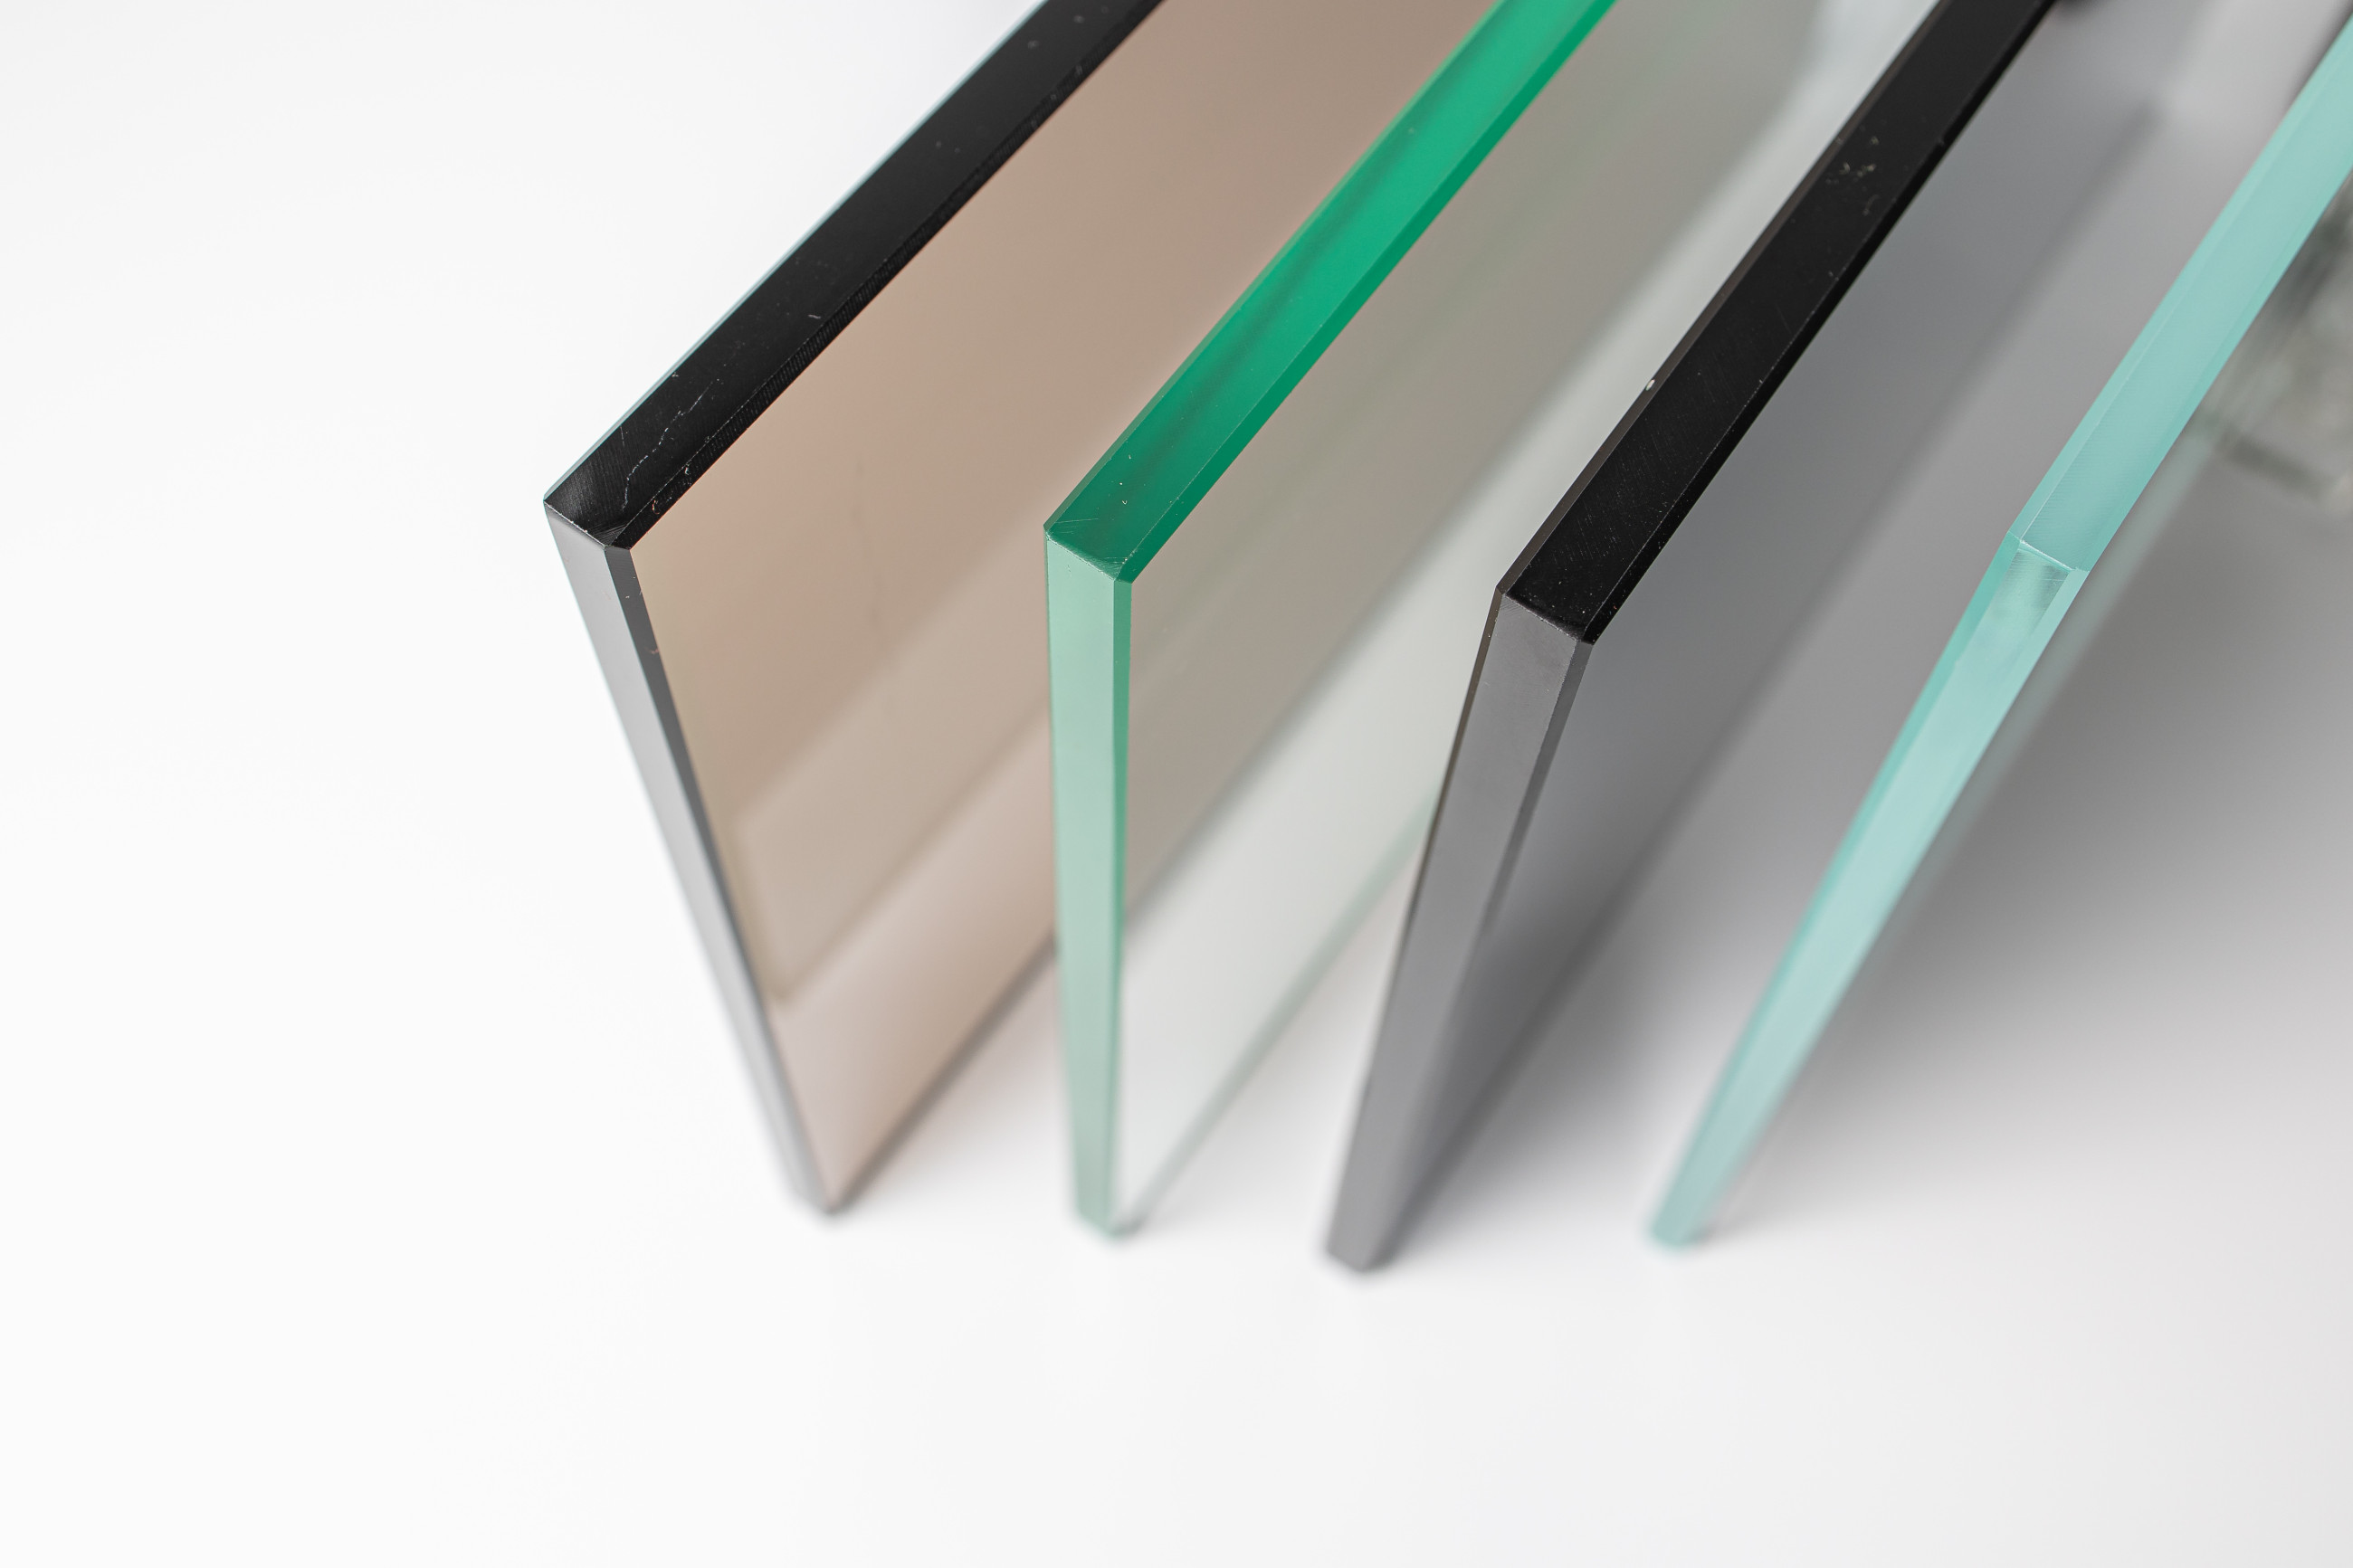 A stack of double glazed glass sheets with green edges